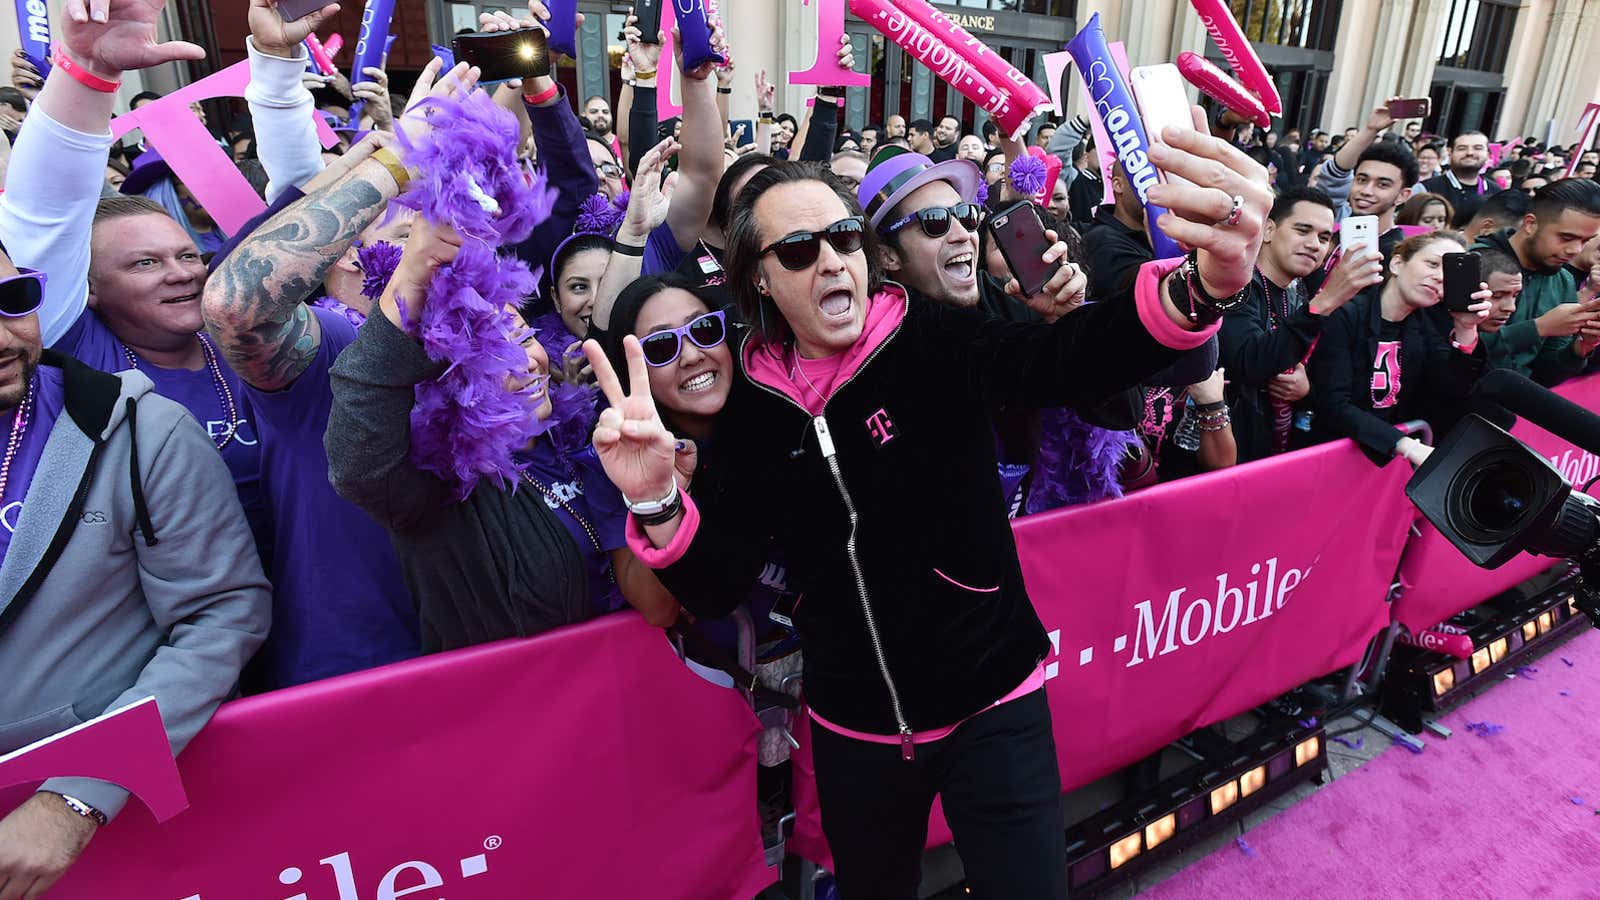 These customers are about to become John Legere’s new bosses.